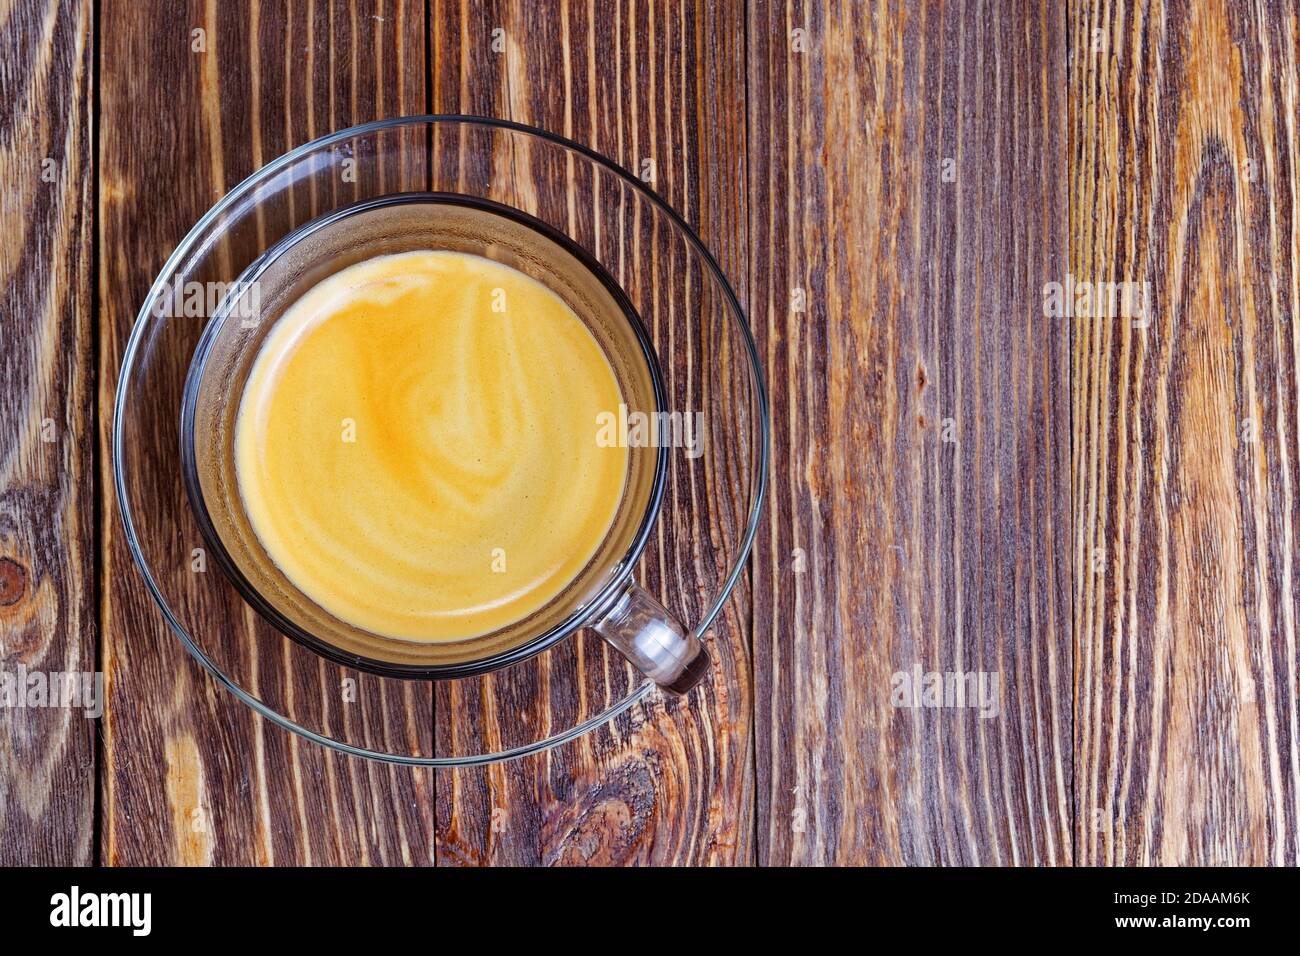 Transparent glass cup with espresso on wooden table. Top view. Stock Photo